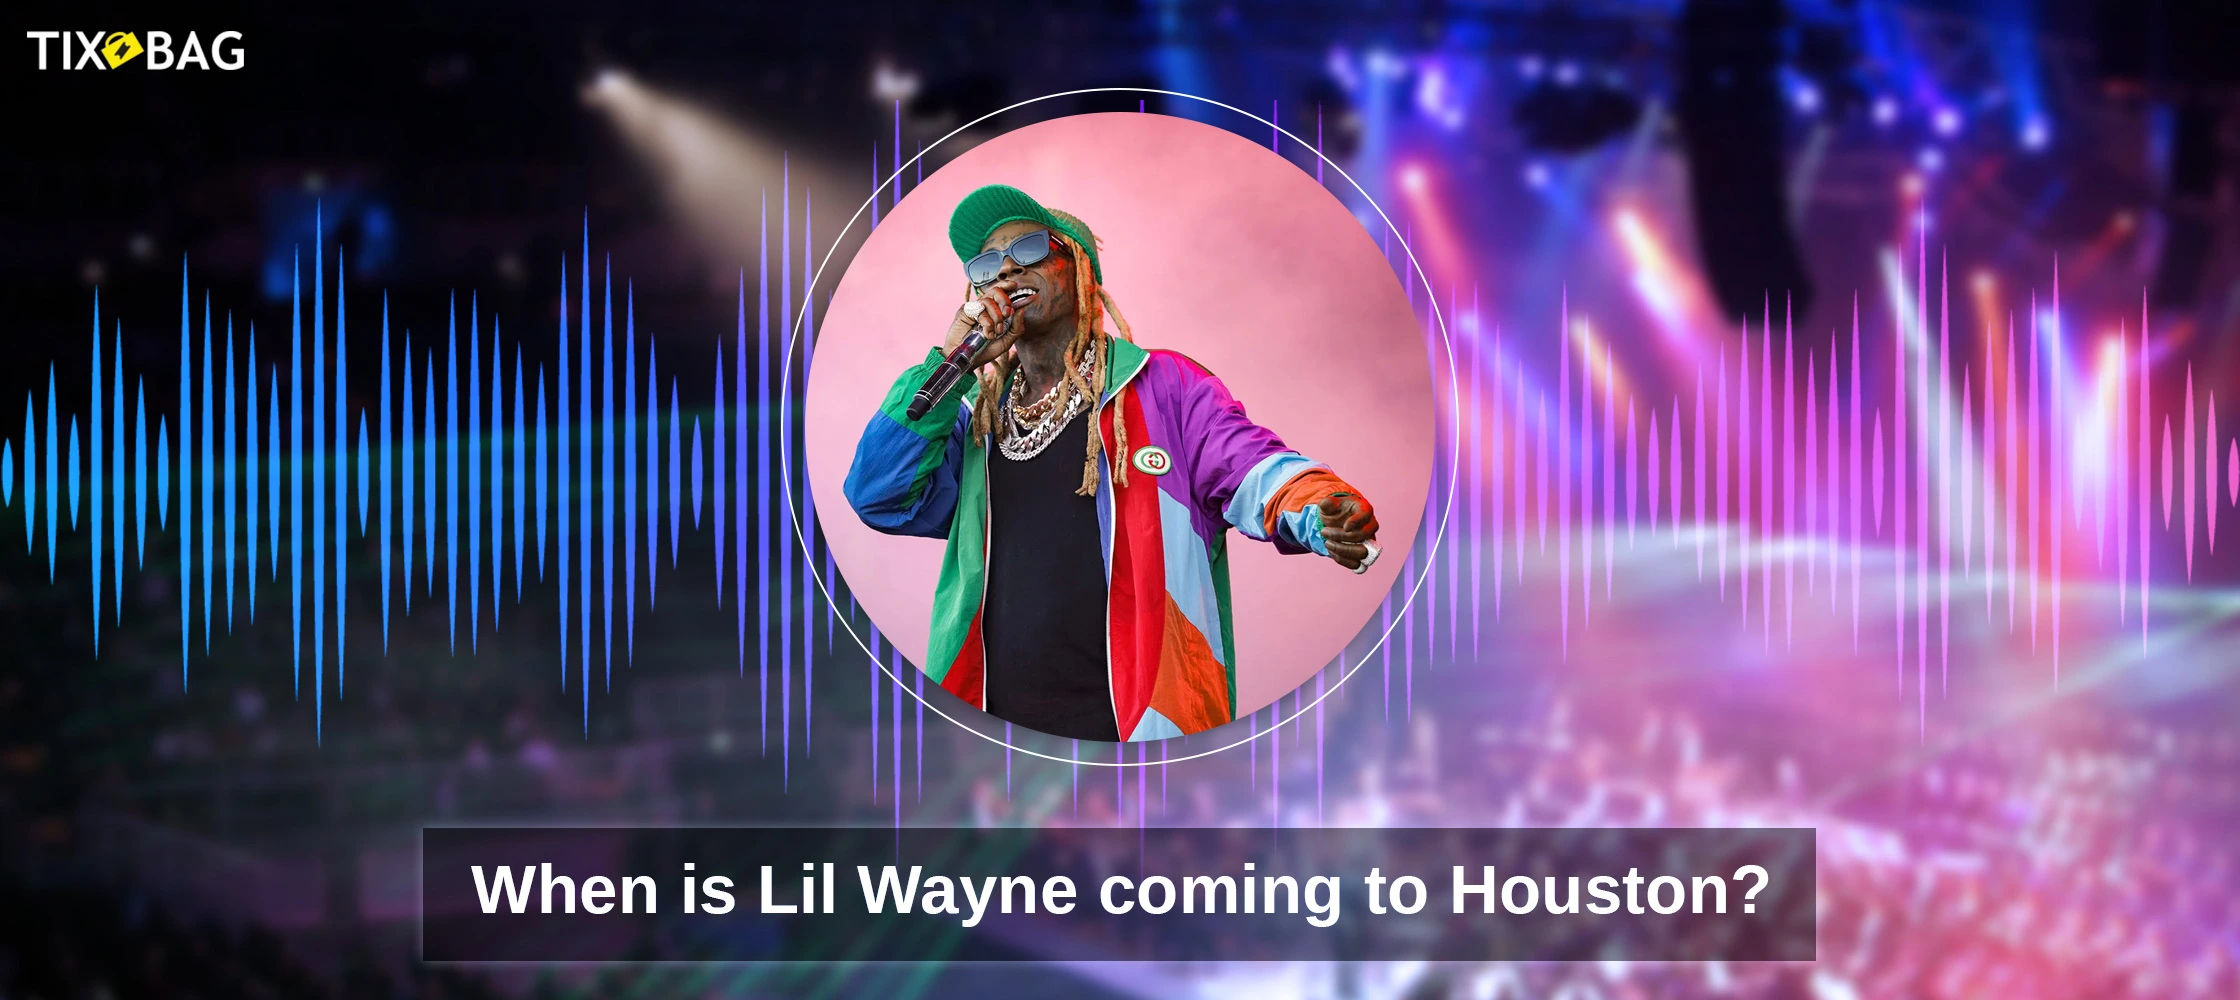 When is Lil Wayne coming to Houston?